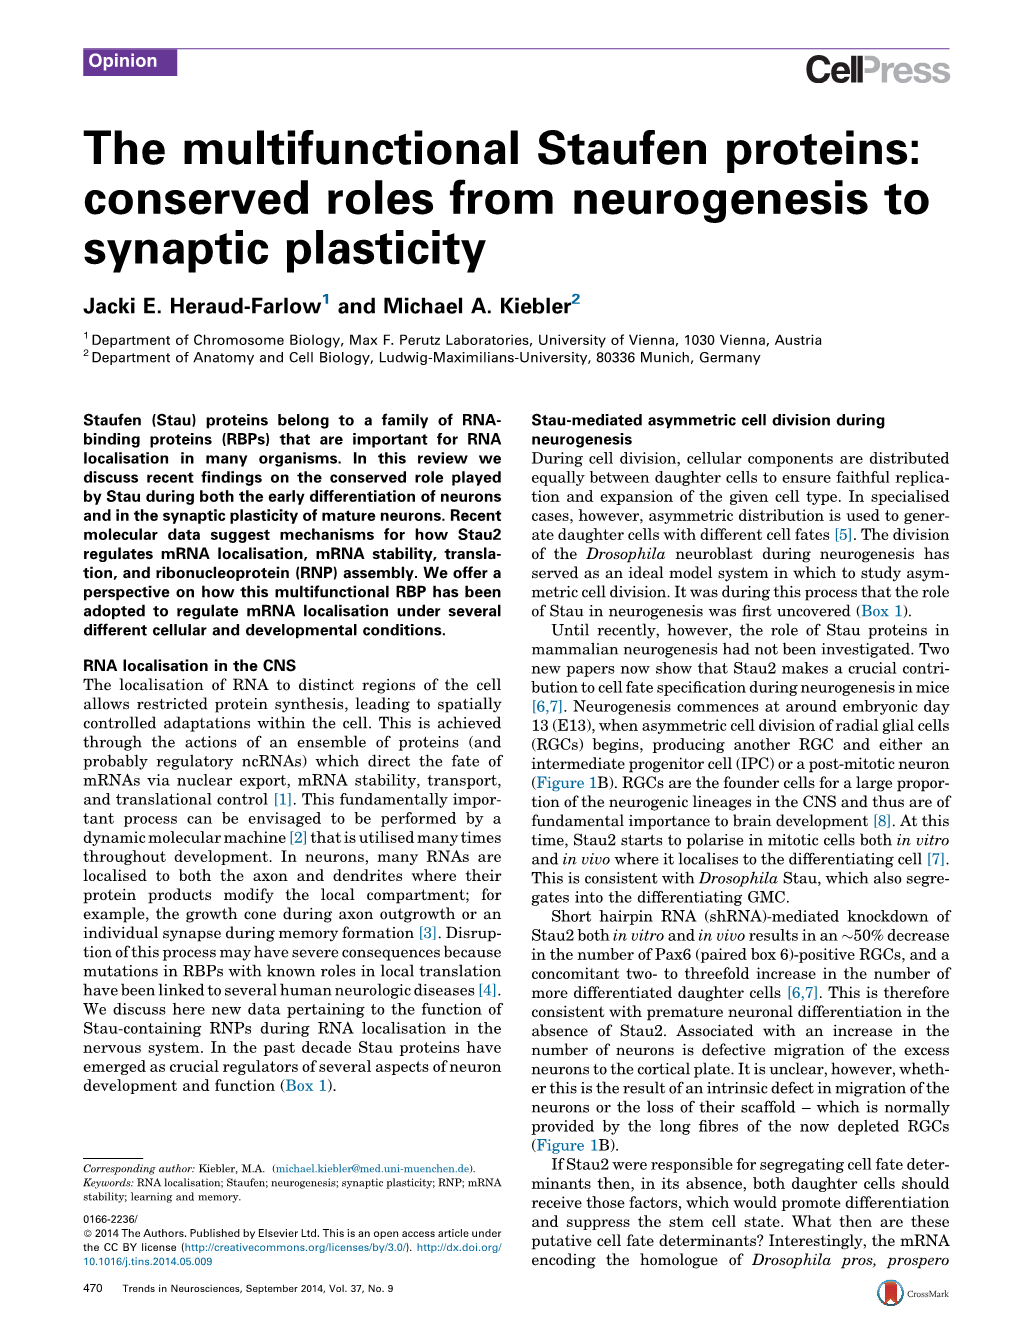 The Multifunctional Staufen Proteins: Conserved Roles from Neurogenesis